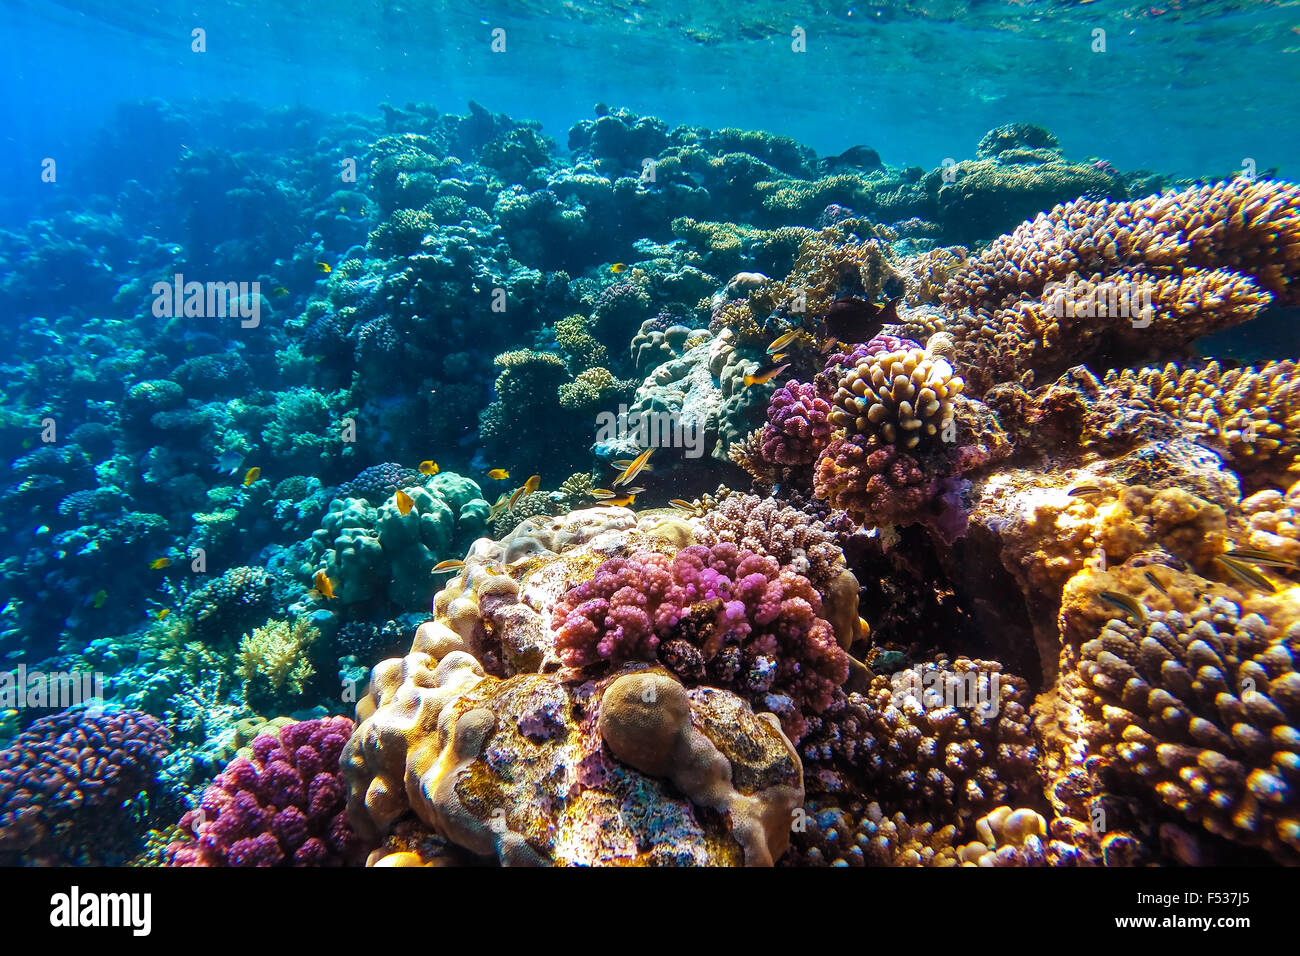 red sea coral reef with hard corals, fishes and sunny sky shining through clean water - underwater photo Stock Photo